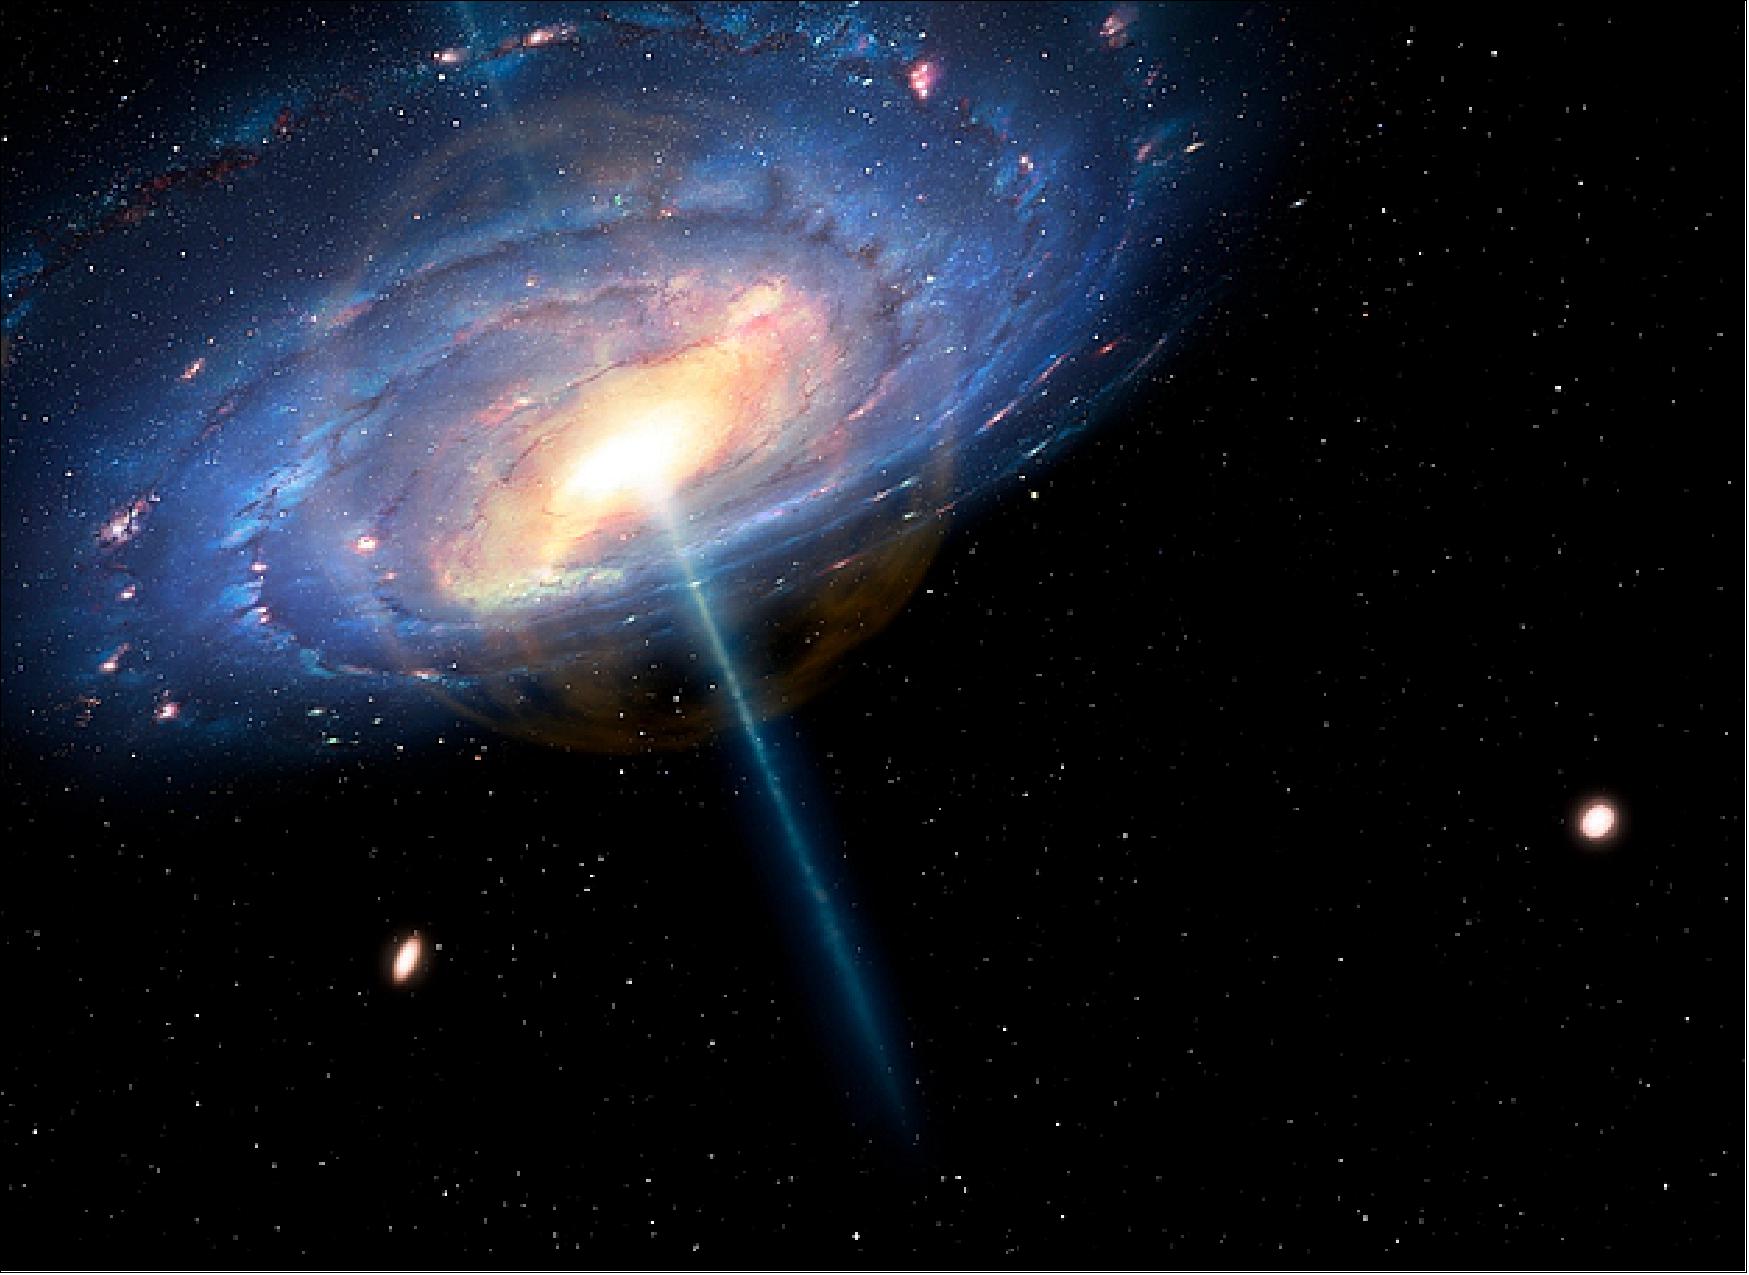 Figure 105: This artist's impression shows the Milky Way as it may have appeared 6 million years ago during a "quasar" phase of activity. A wispy orange bubble extends from the galactic center out to a radius of about 20,000 light-years. Outside of that bubble, a pervasive "fog" of million-degree gas might account for the Galaxy's missing matter of 130 billion solar masses (image credit: Mark A. Garlick/CfA) 128)